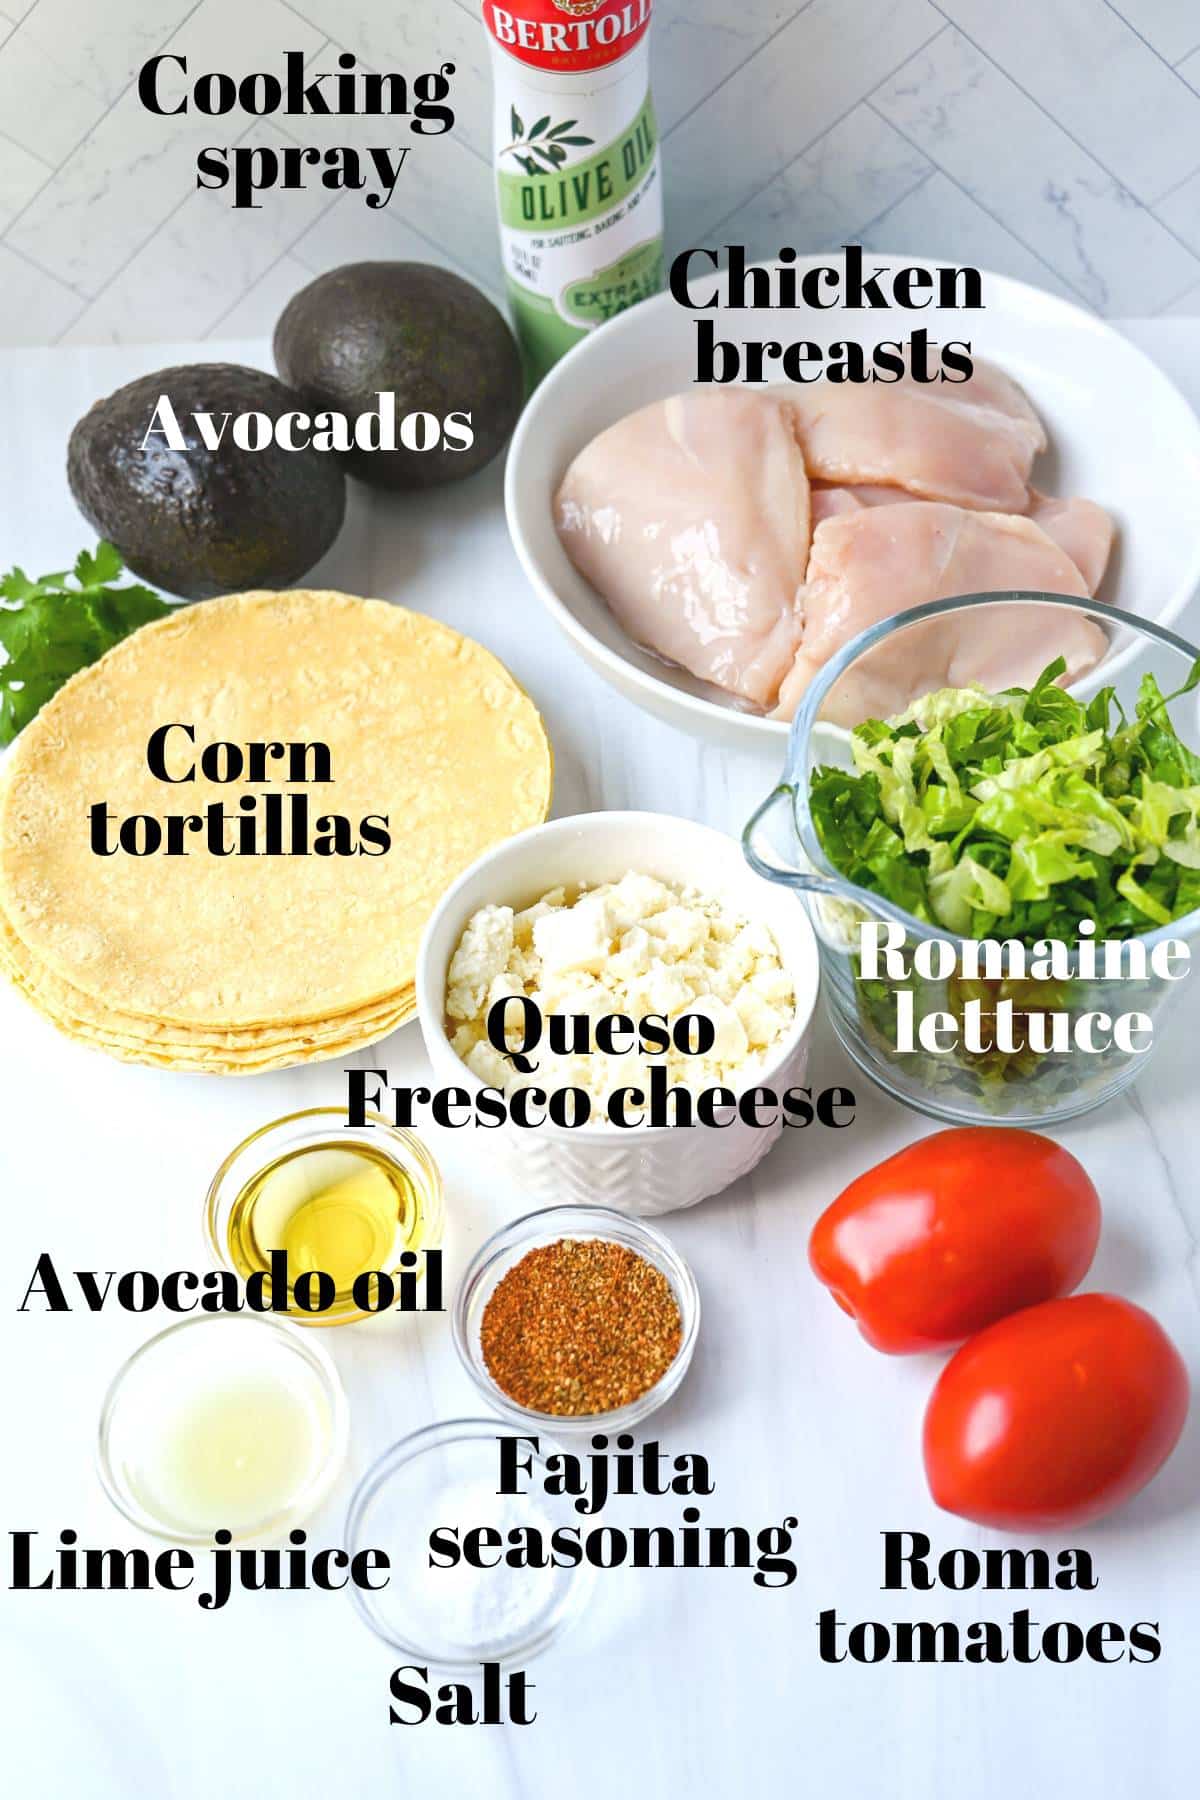 ingredients to make tostadas with mashed avocado, chicken, and toppings measured out on a counter